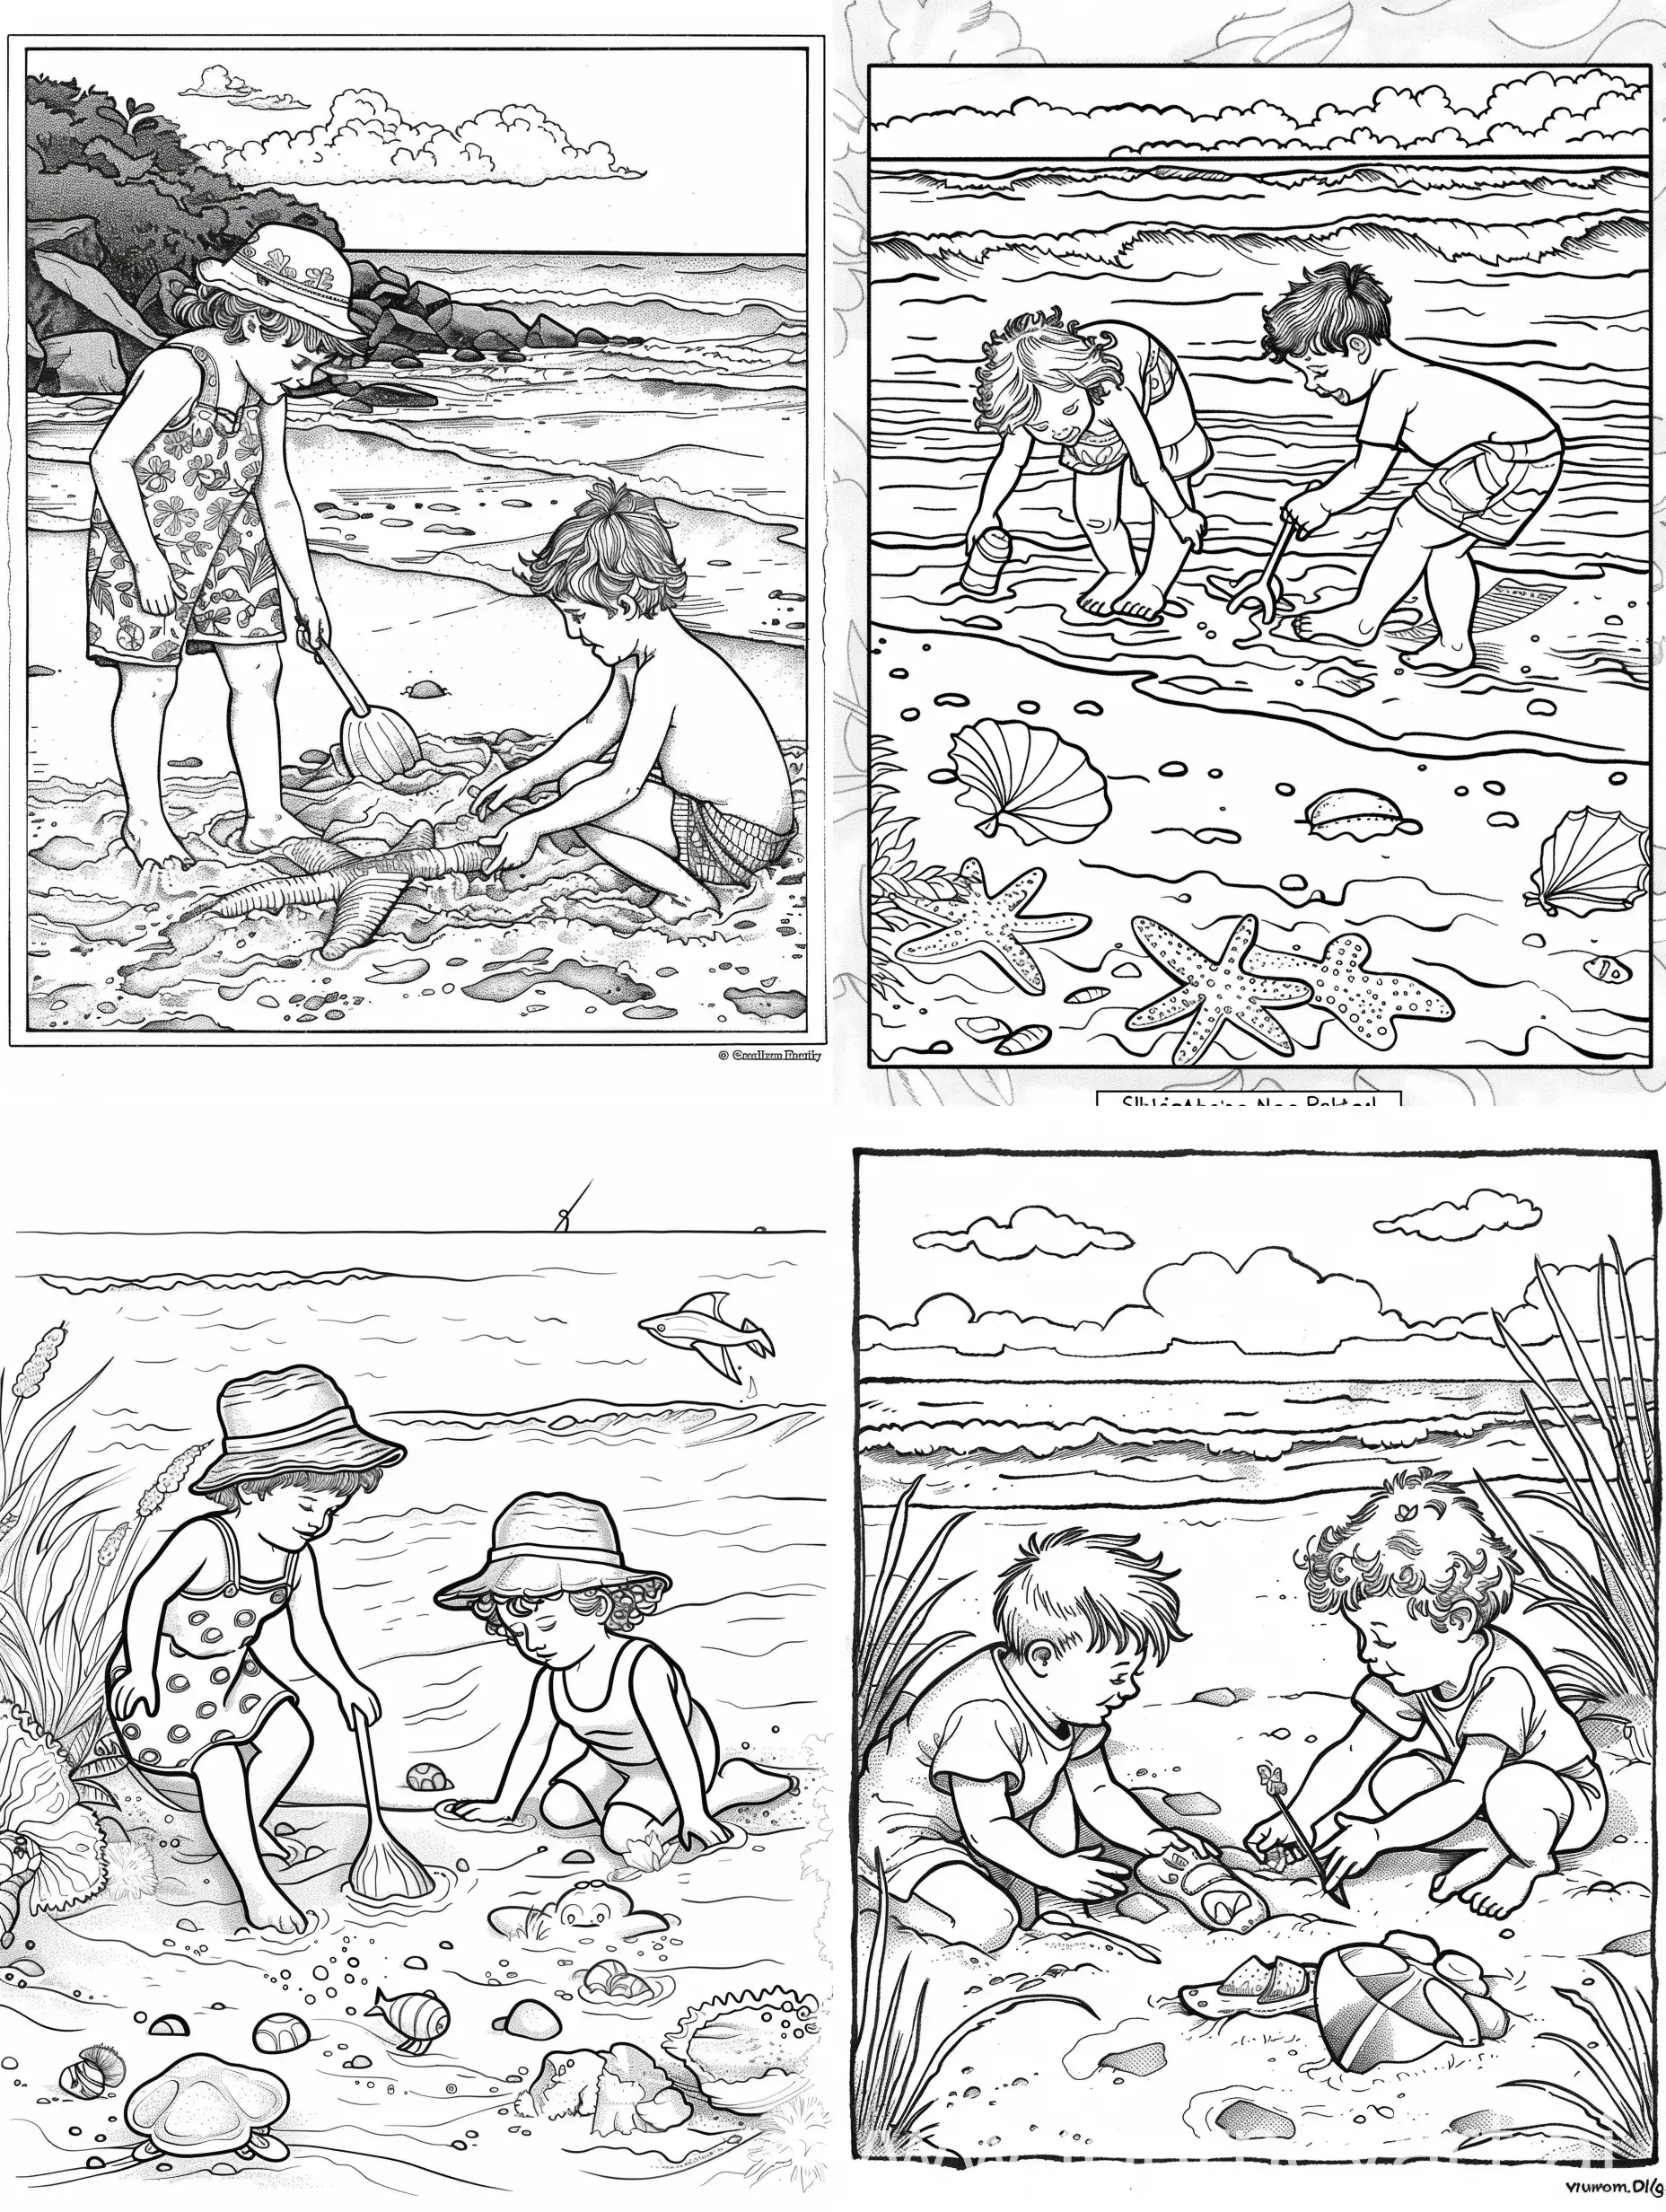 Children-Playing-on-the-Beach-Black-and-White-Coloring-Book-Page